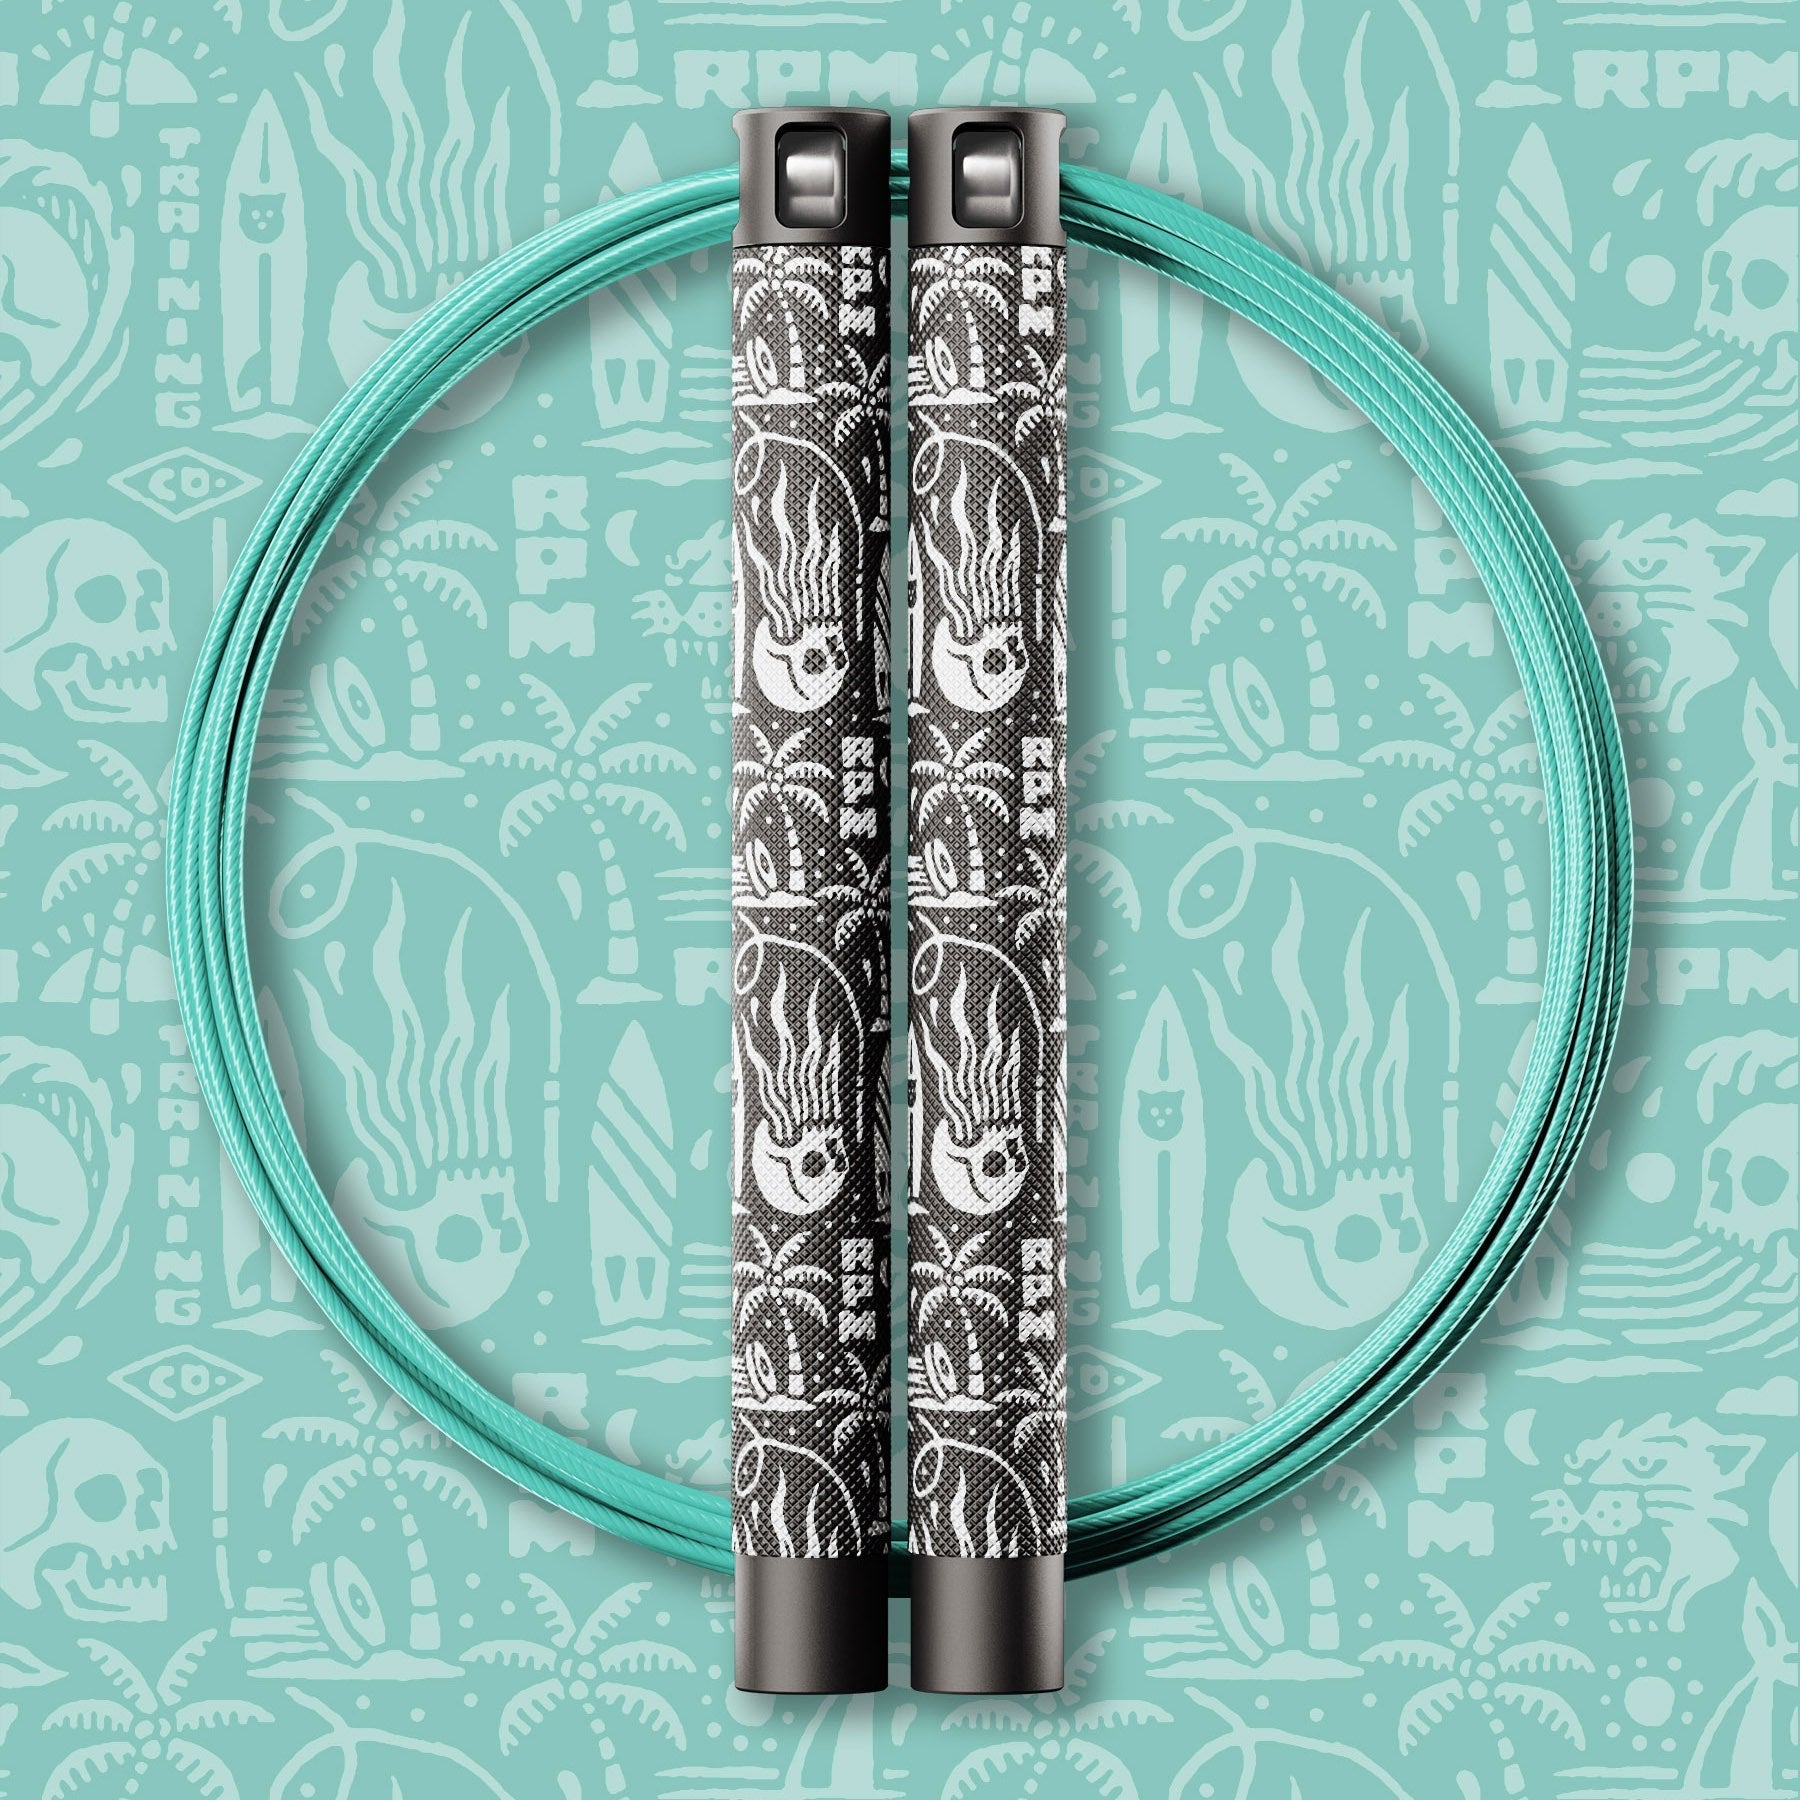 RPM Speed Rope - Session4 (Limited Edition)